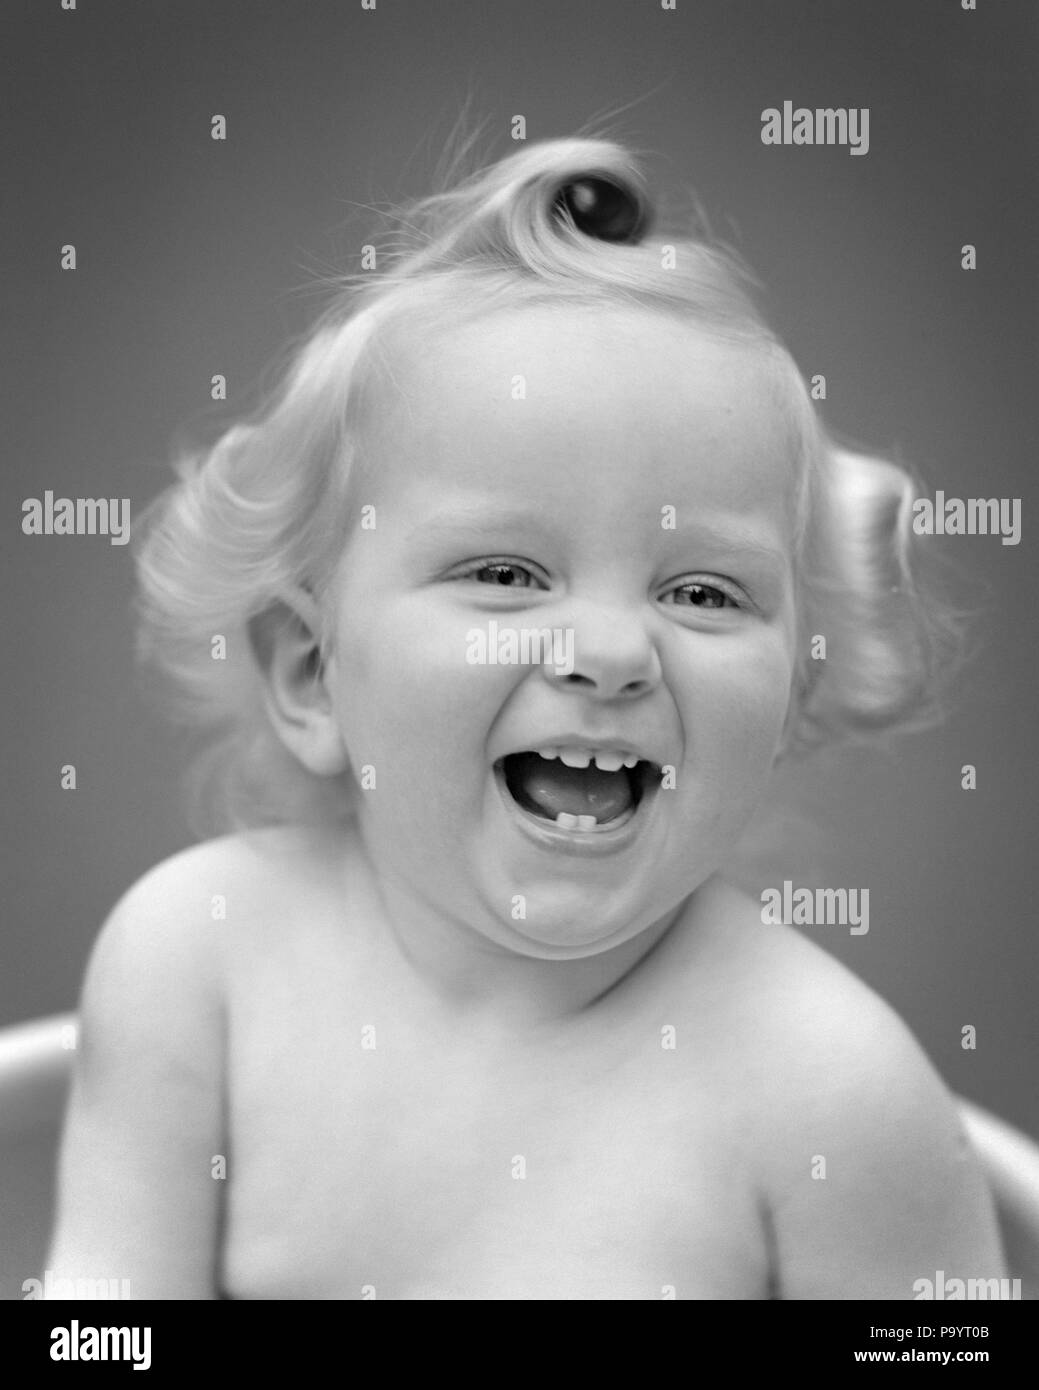 1940s LAUGHING BLONDE BABY GIRL WITH BIG CURL ON TOP OF HEAD LOOKING AT CAMERA - b19264 HAR001 HARS LIFESTYLE FEMALES HEALTHINESS HOME LIFE EXPRESSIONS B&W EYE CONTACT PRETTY HAPPINESS HEAD AND SHOULDERS CHEERFUL EXCITEMENT SMILES JOYFUL STYLISH BABY BOY CURL JUVENILES KEWPIE DOLL TOP OF HEAD BABY GIRL BLACK AND WHITE CAUCASIAN ETHNICITY HAR001 OLD FASHIONED Stock Photo